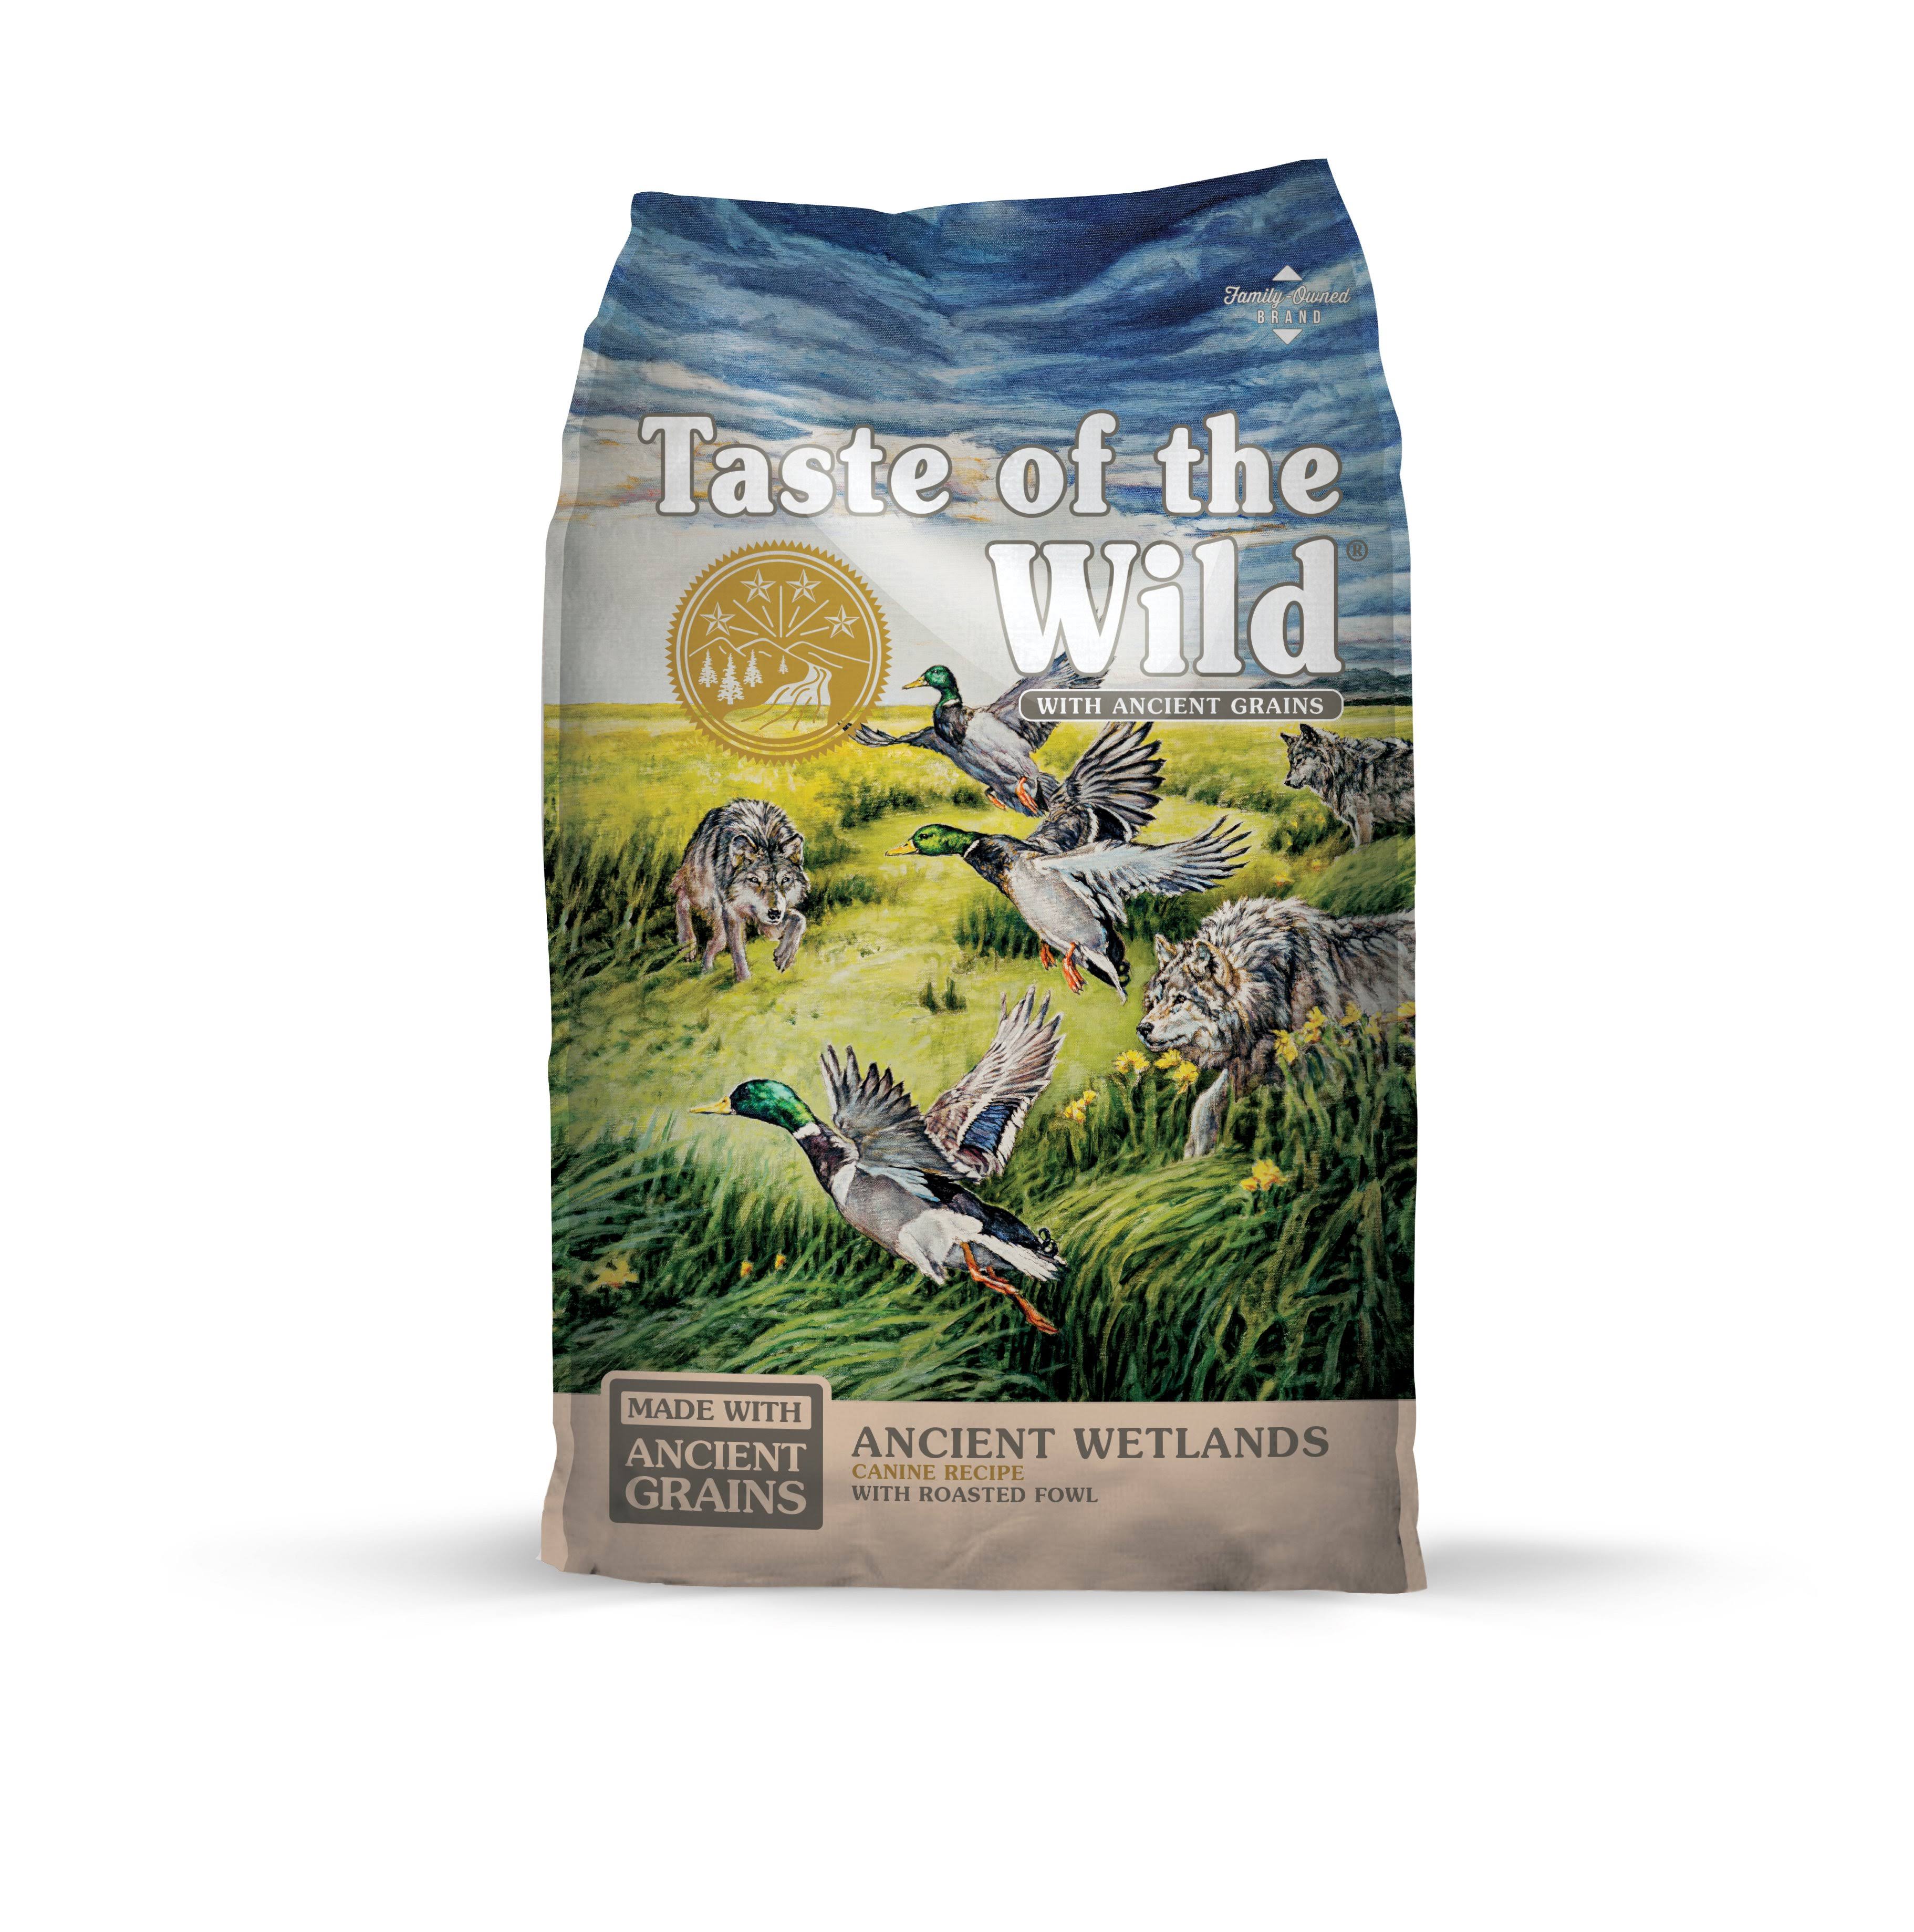 Taste of The Wild Ancient Wetlands with Roasted Fowl Dry Dog Food, 28 Pounds